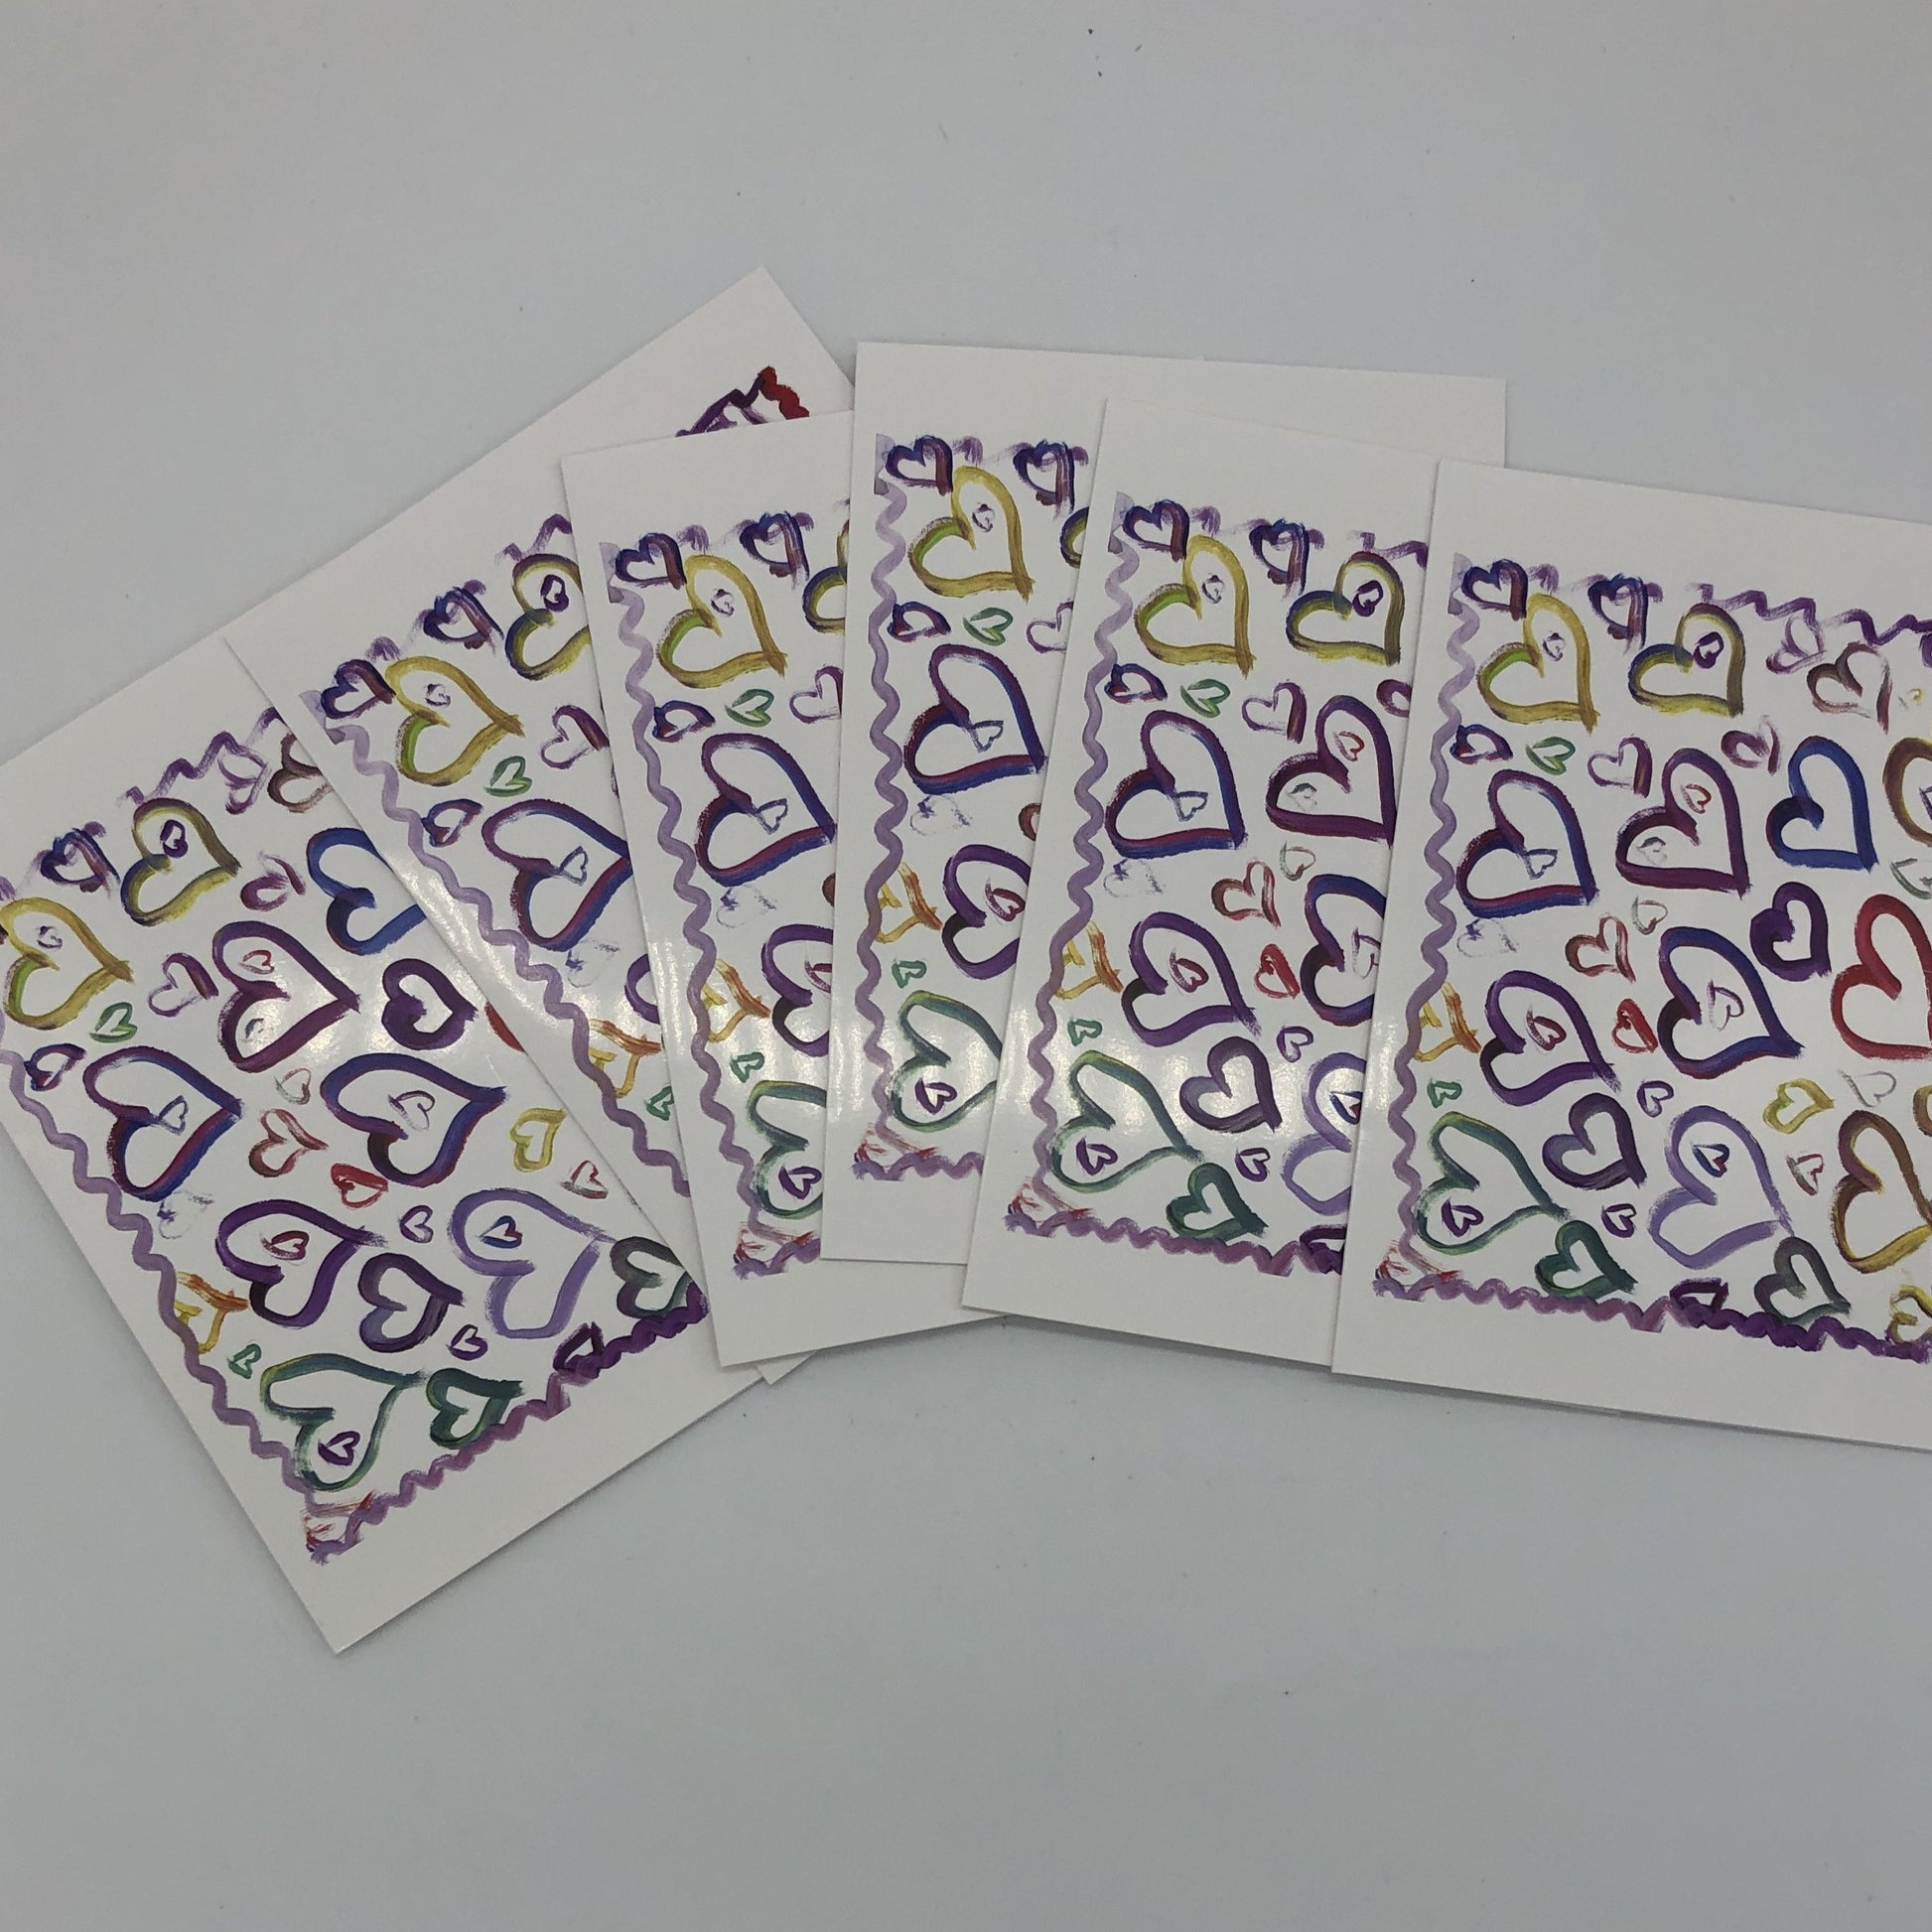 Six of the "Hearts" greeting cards fanned out. White greeting card with about a dozen large water colored hearts in blues, purples, and yellows. There are several smaller hearts of varying sizes all around those larger hearts and a squiggly line in shades of purple and red framing all of it.